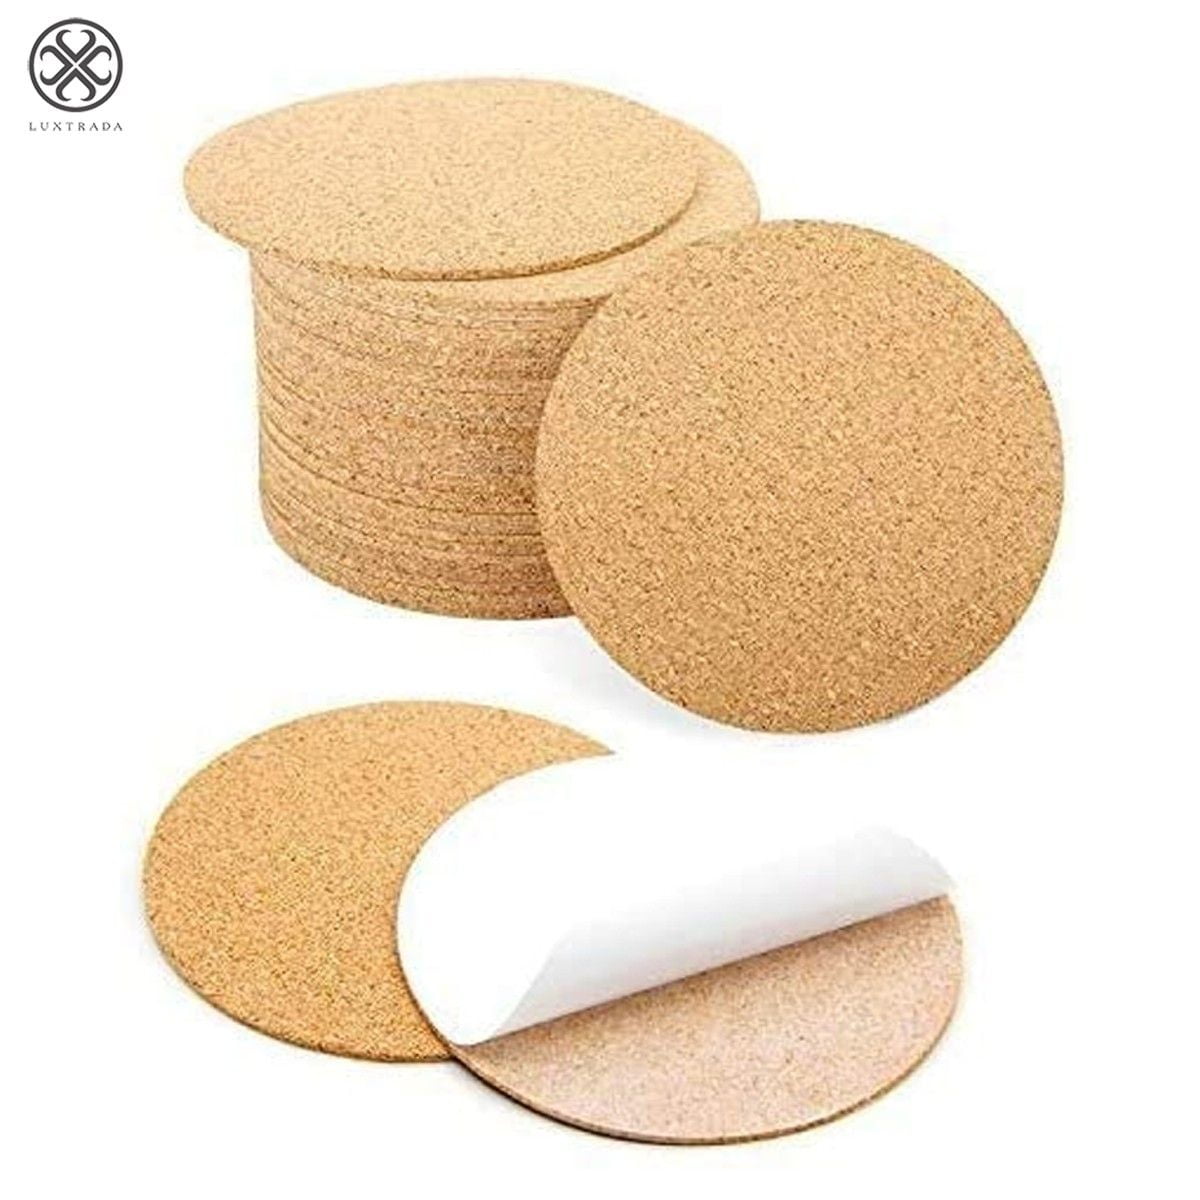 Details about   10-80Pcs 4x4inch Self-Adhesive Cork Squares Round Backing Sheets Tiles Coasters 